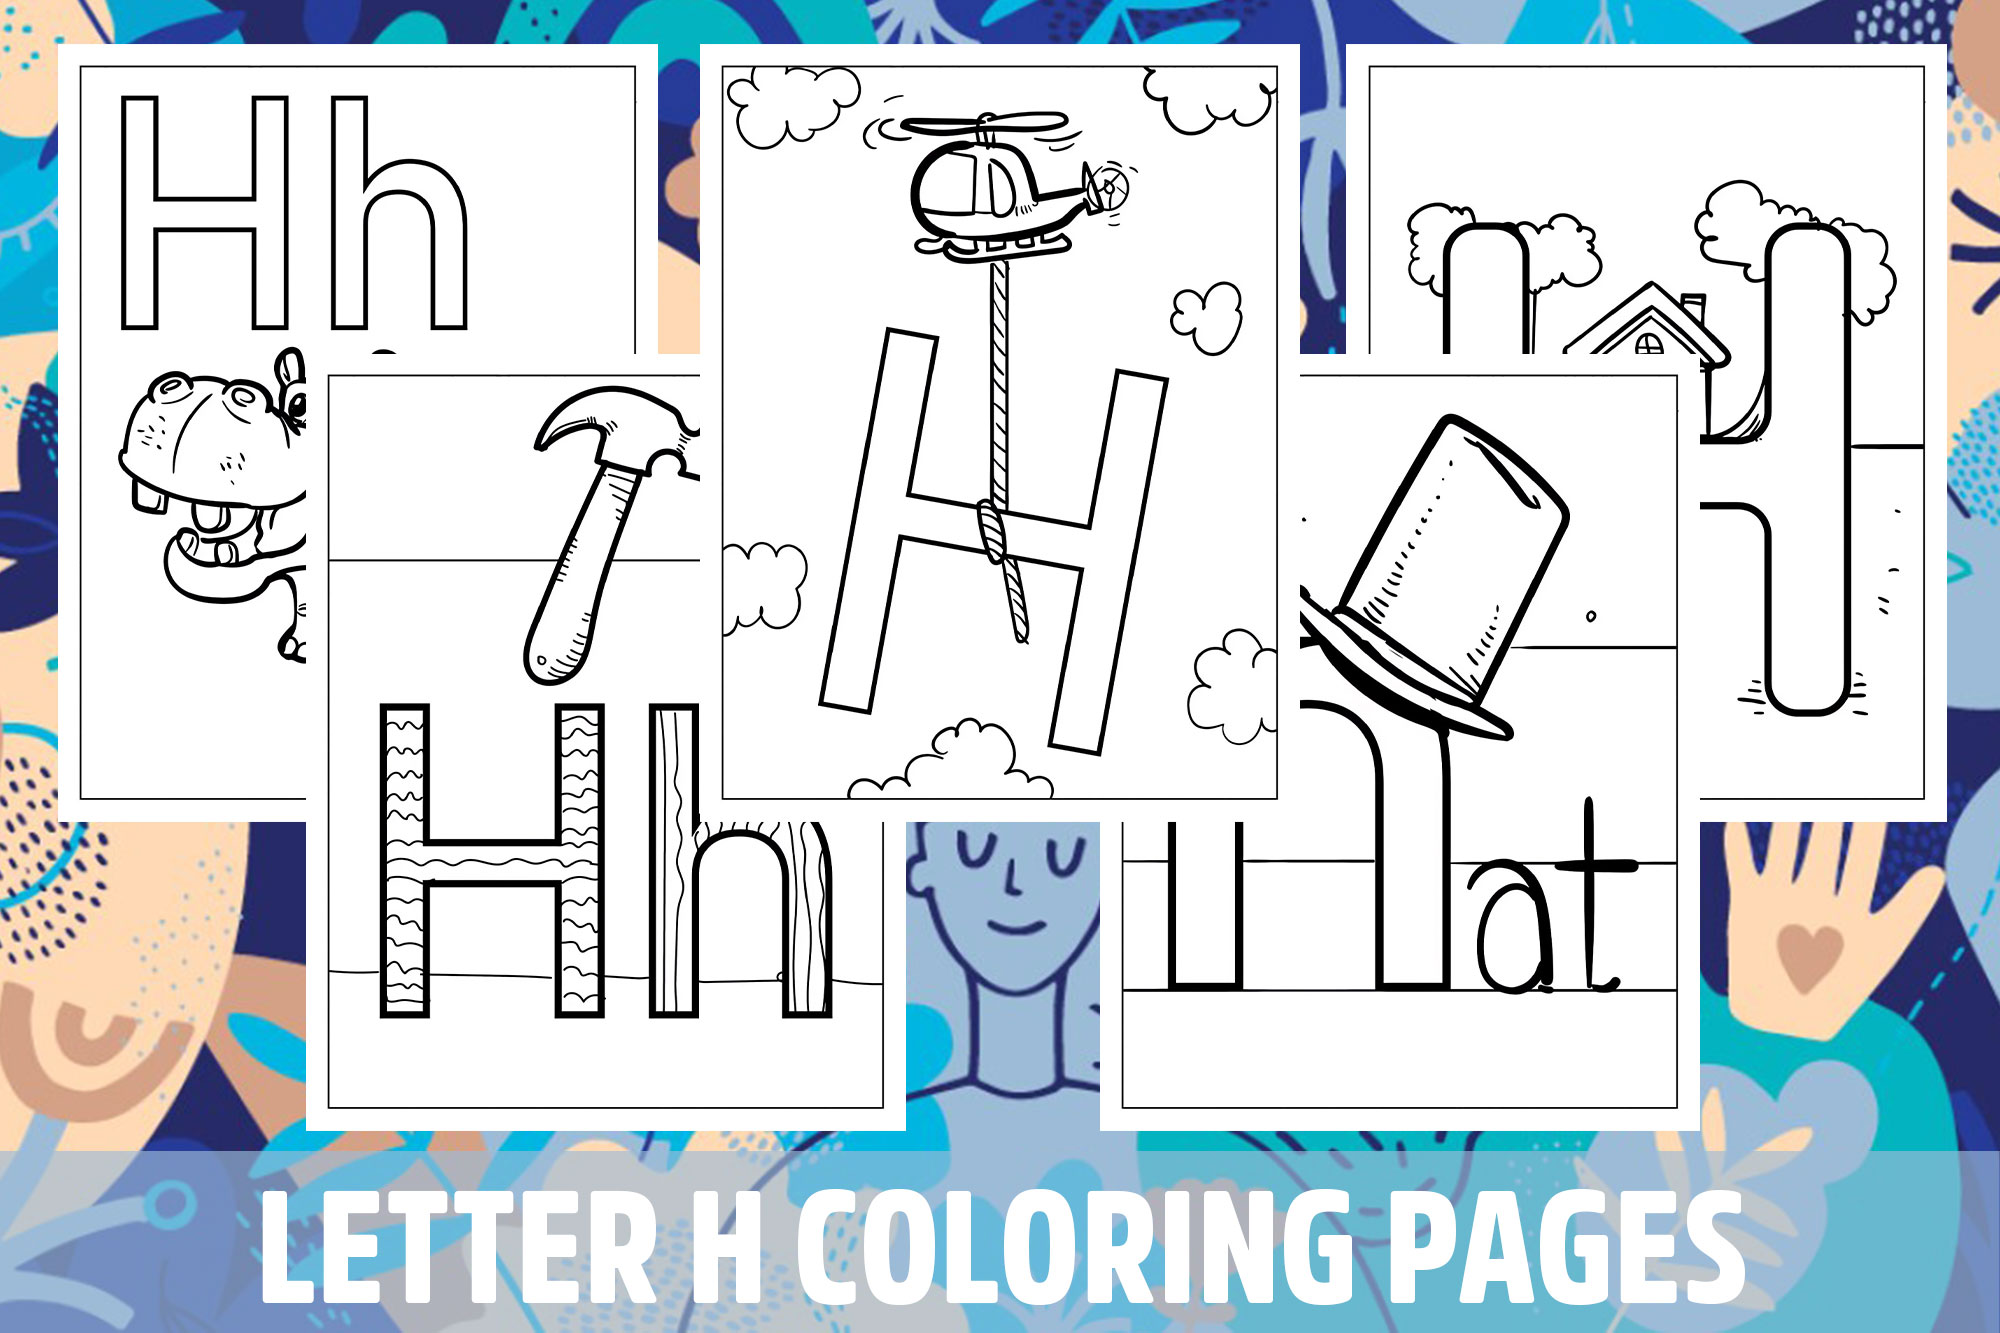 Letter h coloring pages for kids girls boys teens birthday school activity made by teachers